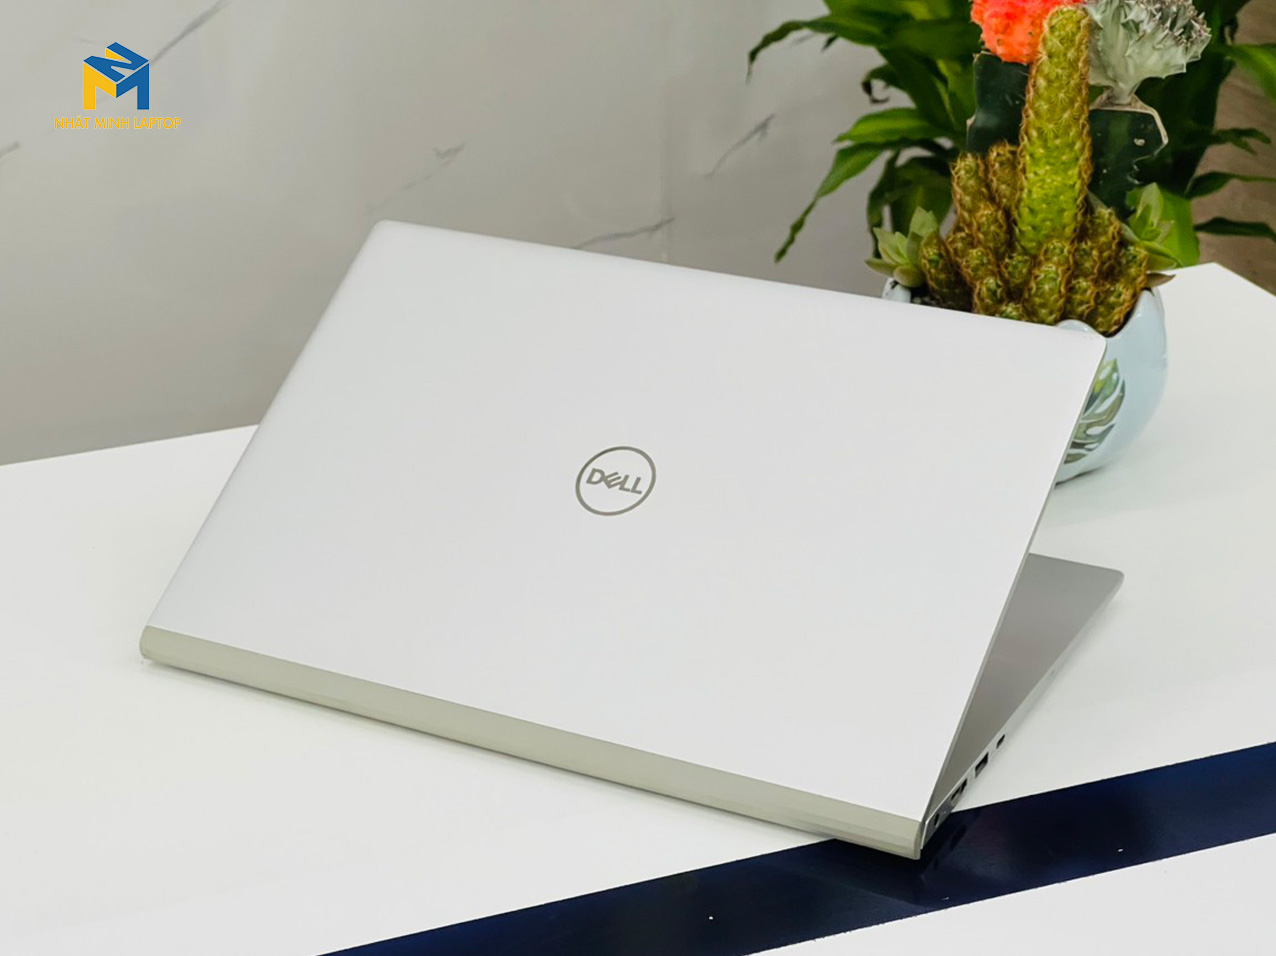 dell inspiron 14 5402 thiết kế